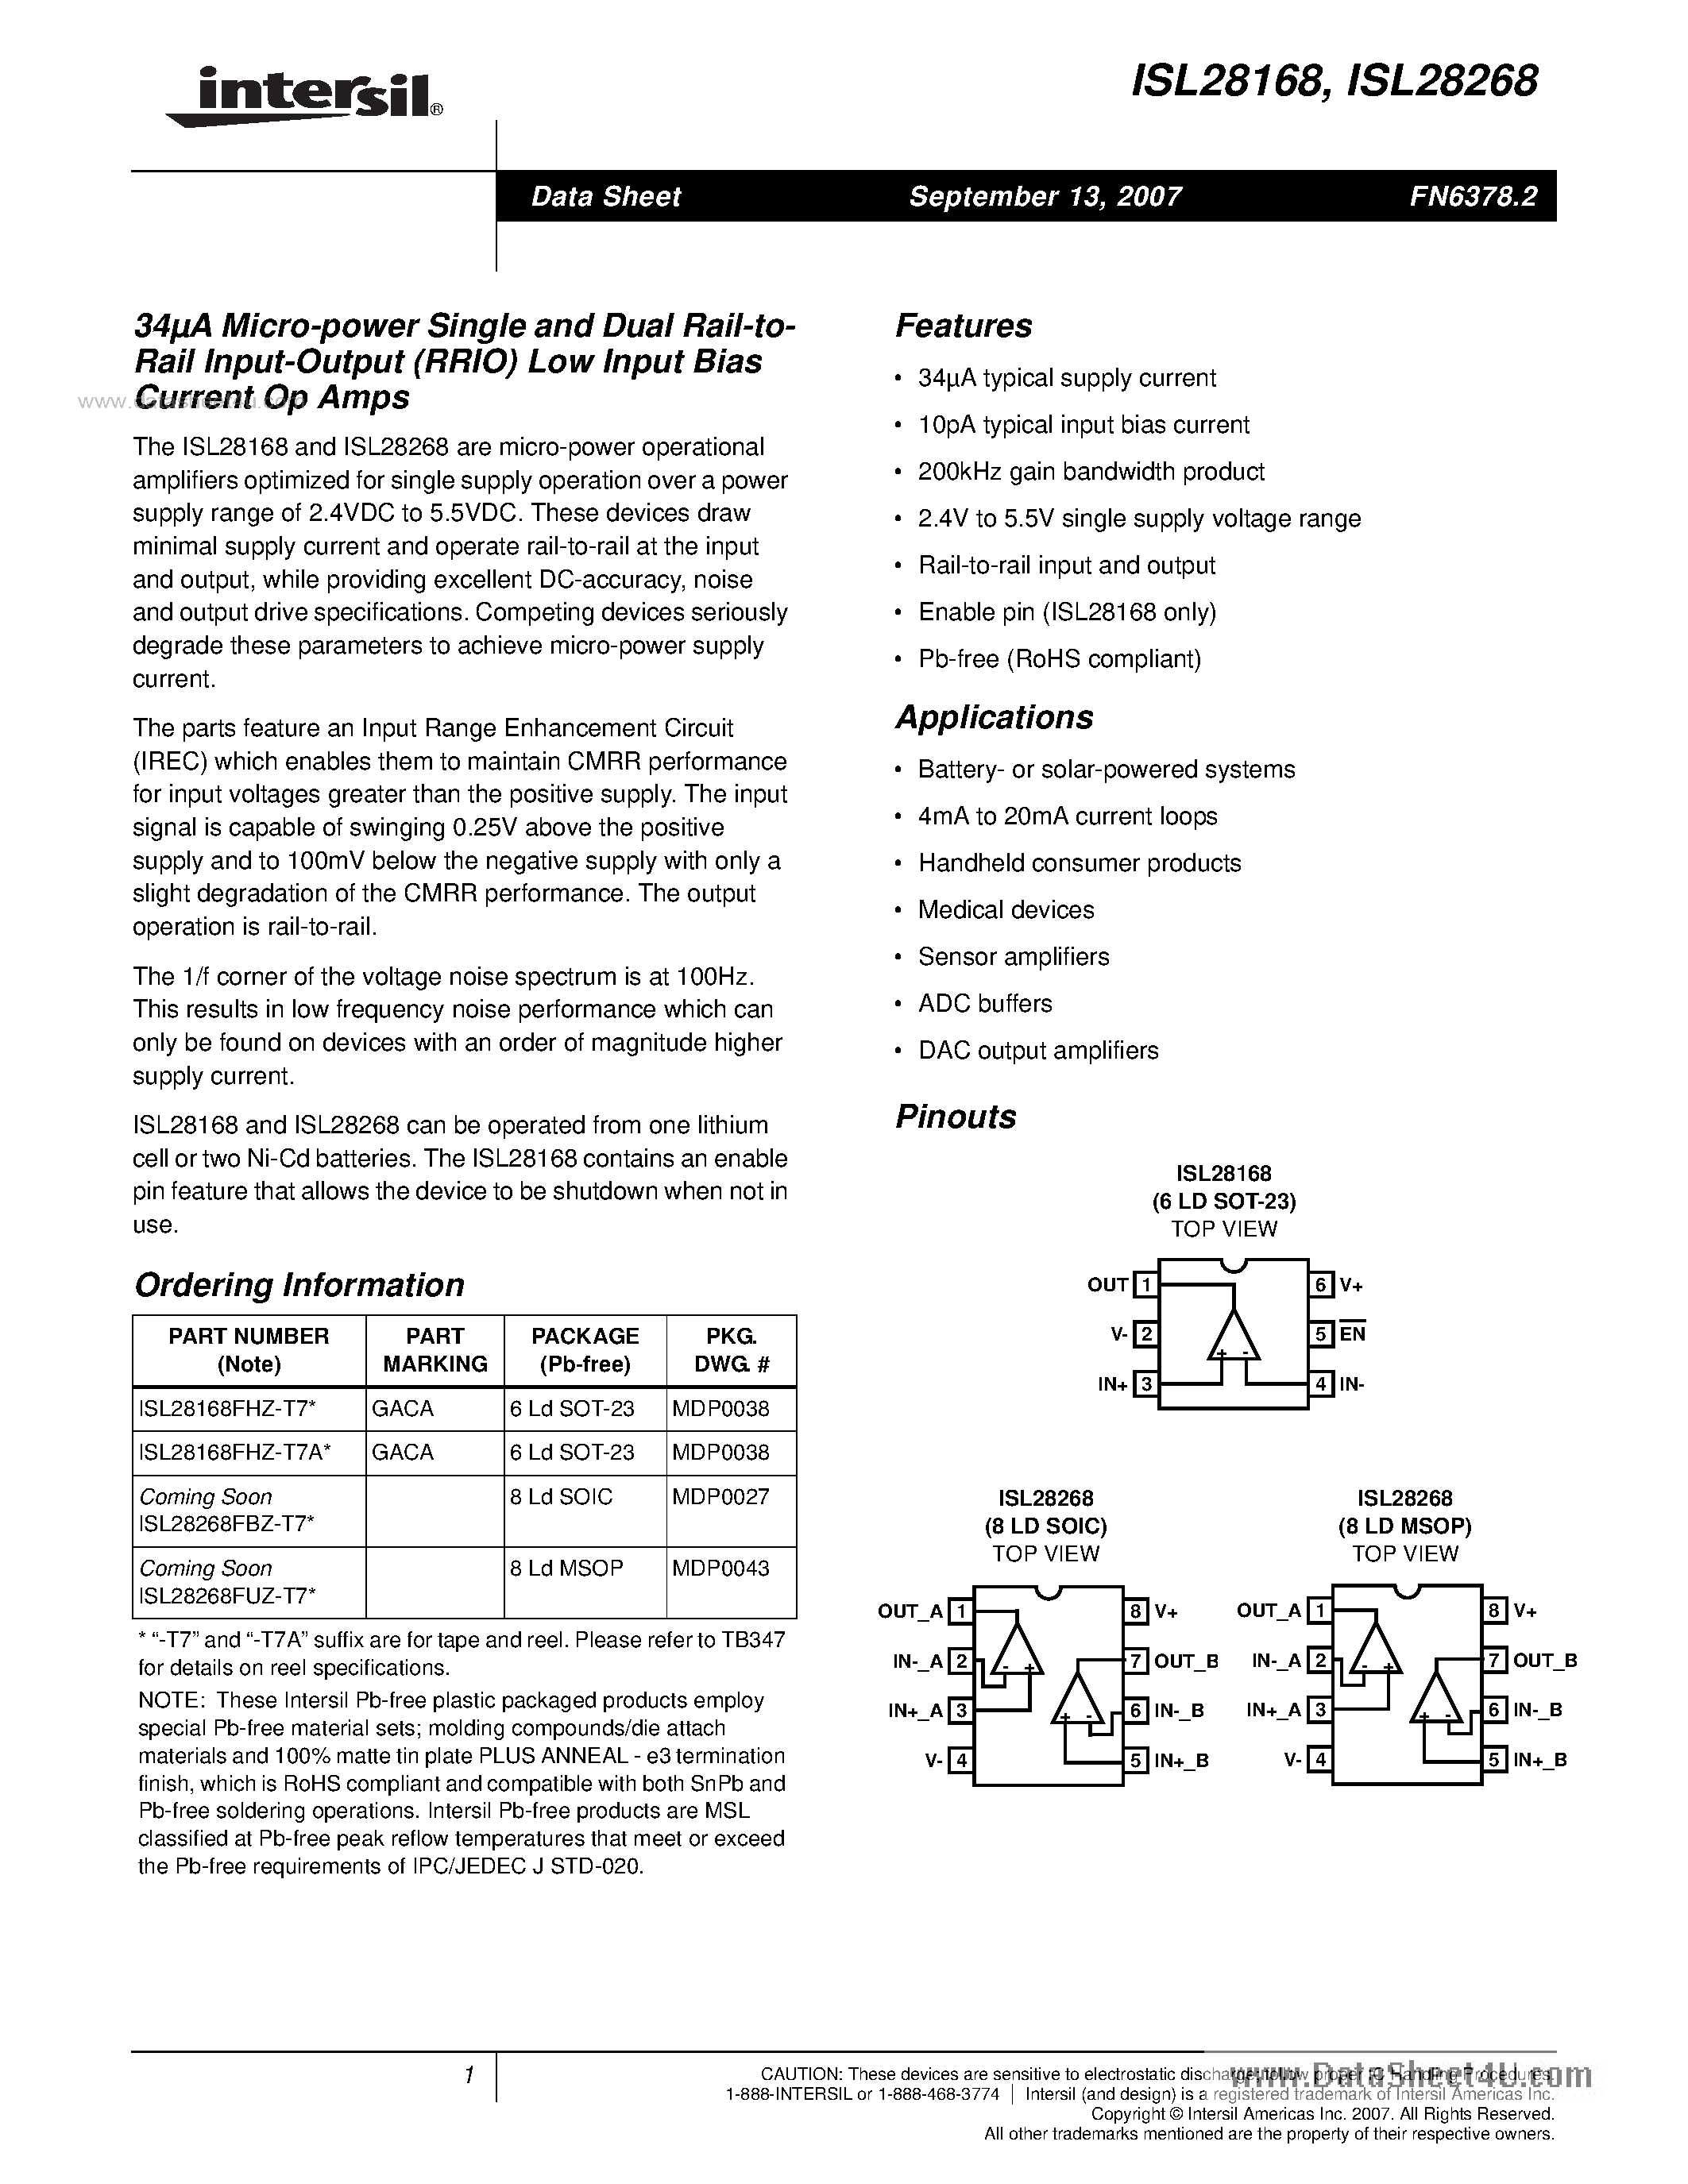 Datasheet ISL28268 - (ISL28168 / ISL28268) Micro-power Single and Dual Rail-to-Rail Input-Output (RRIO) Low Input Bias Current Op Amps page 1